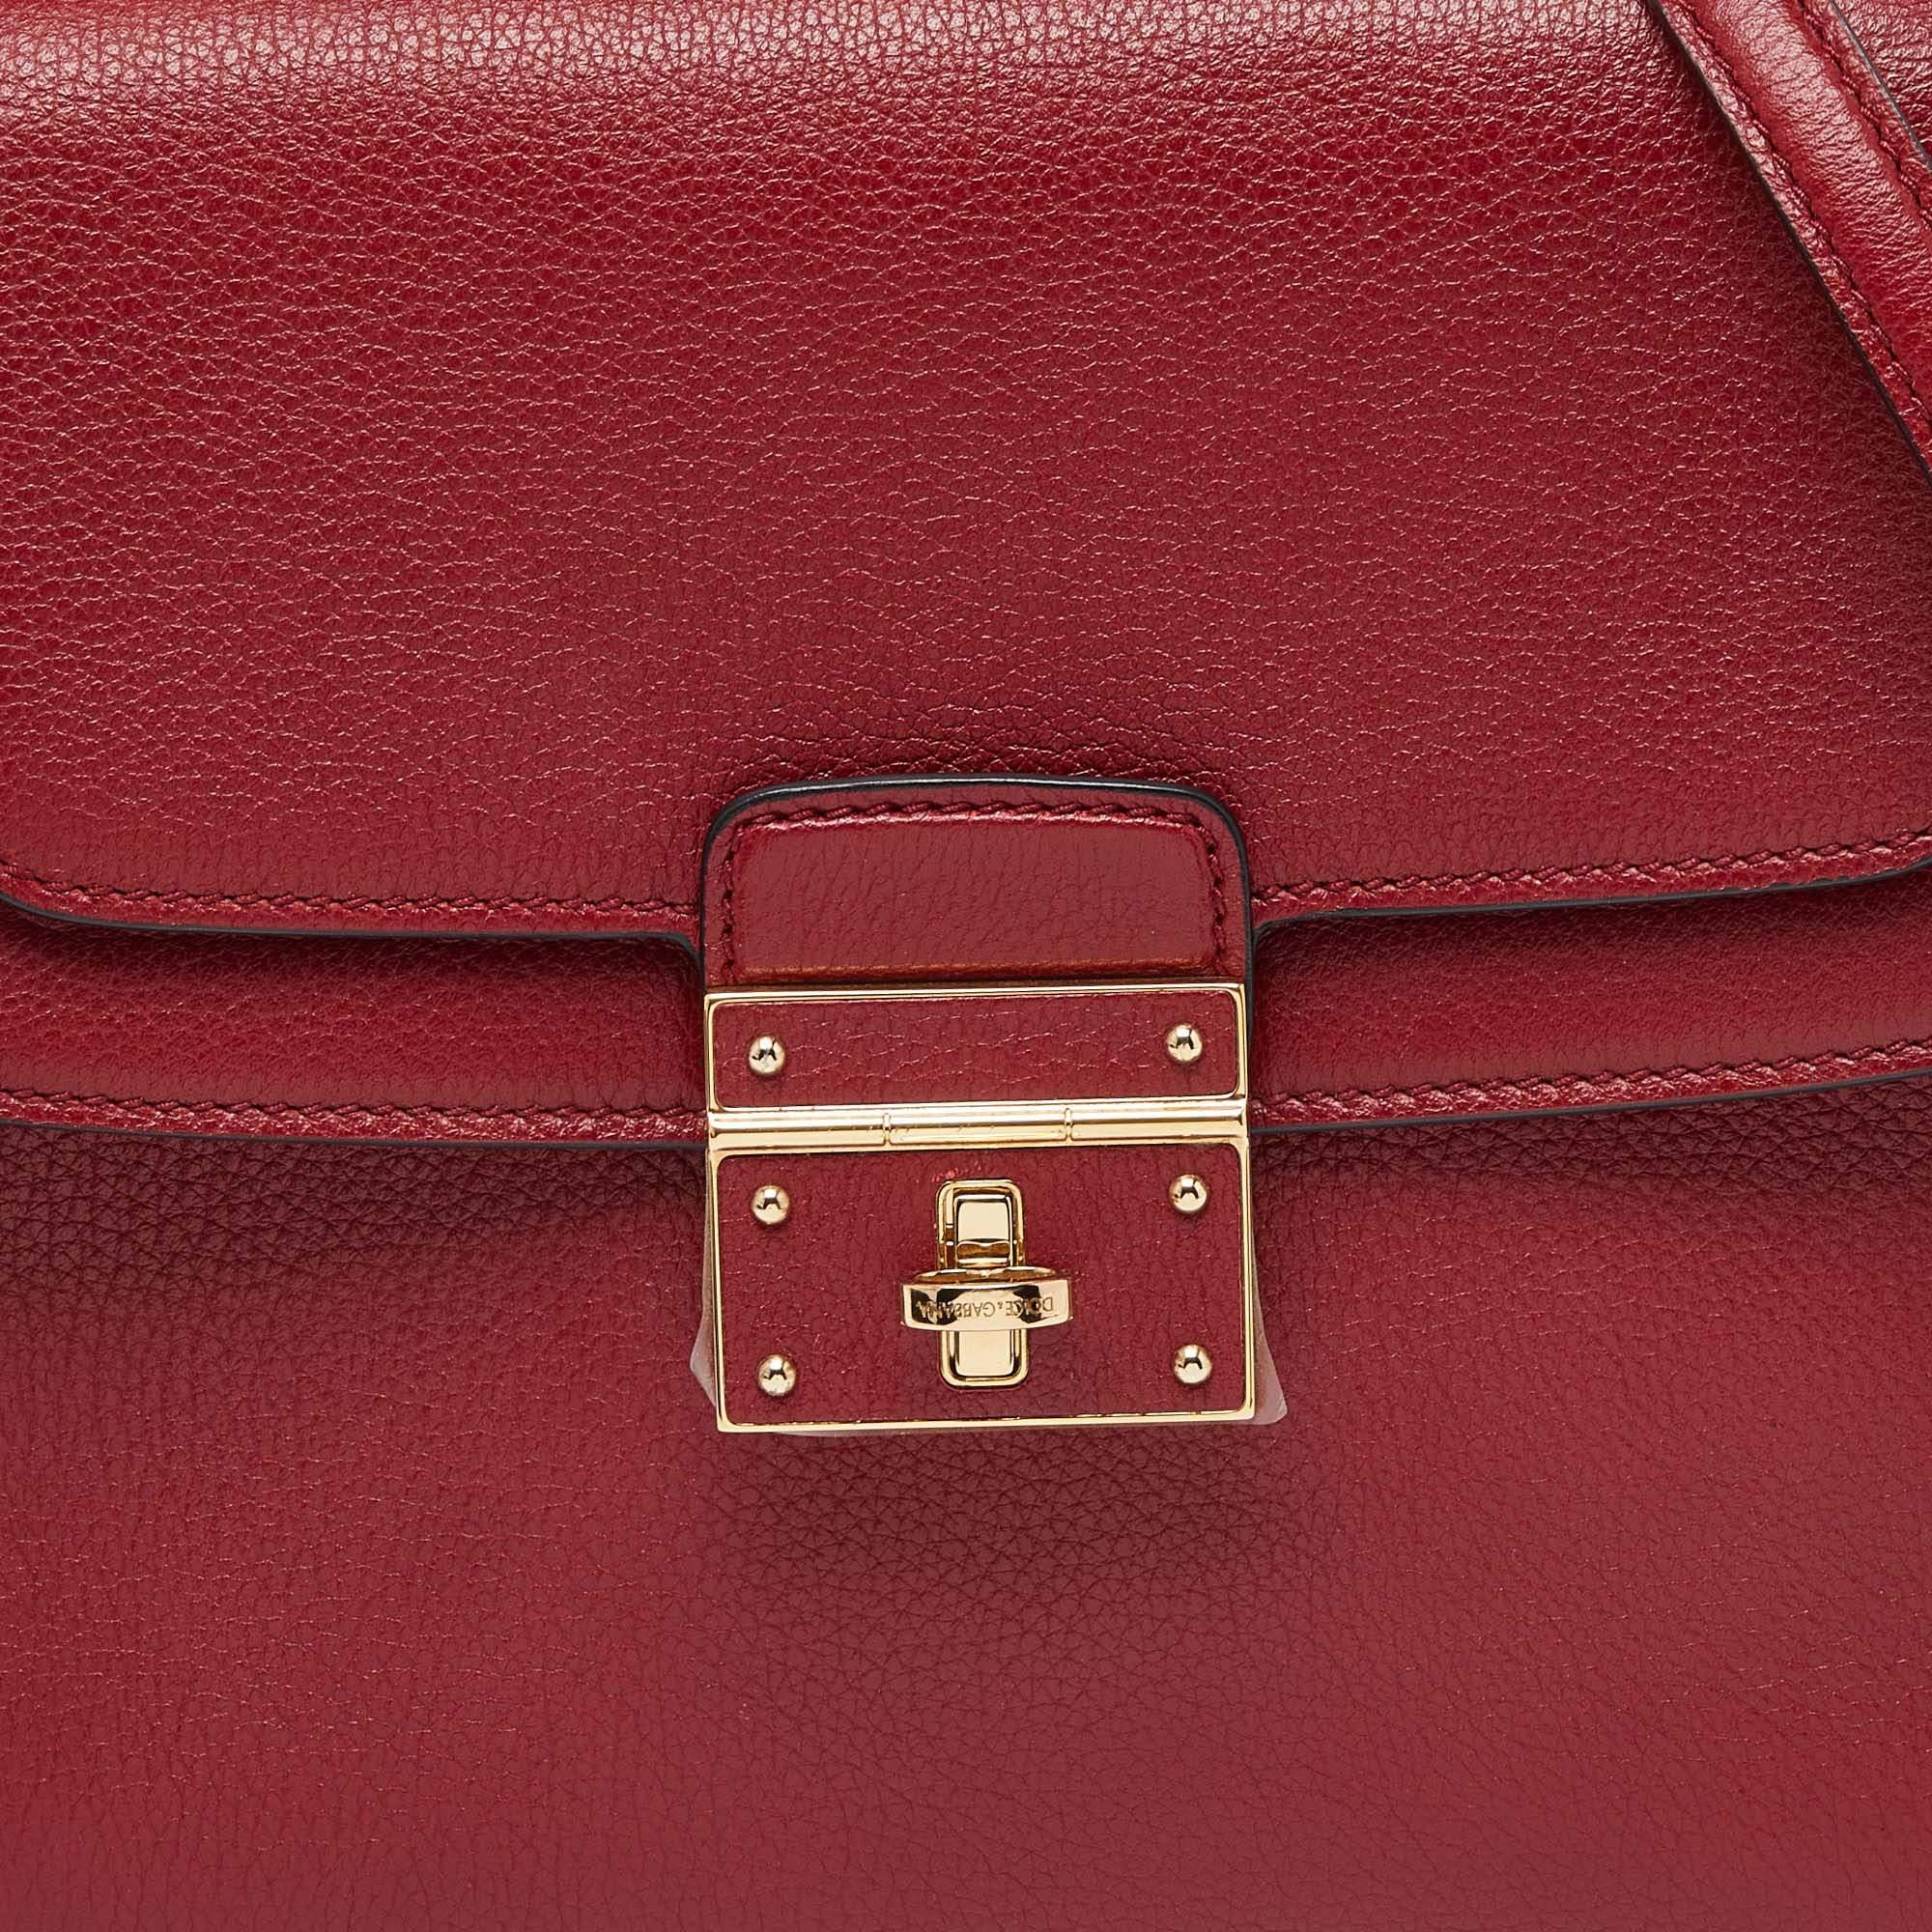 Dolce & Gabbana Red Leather Greta Top Handle Bag For Sale 5